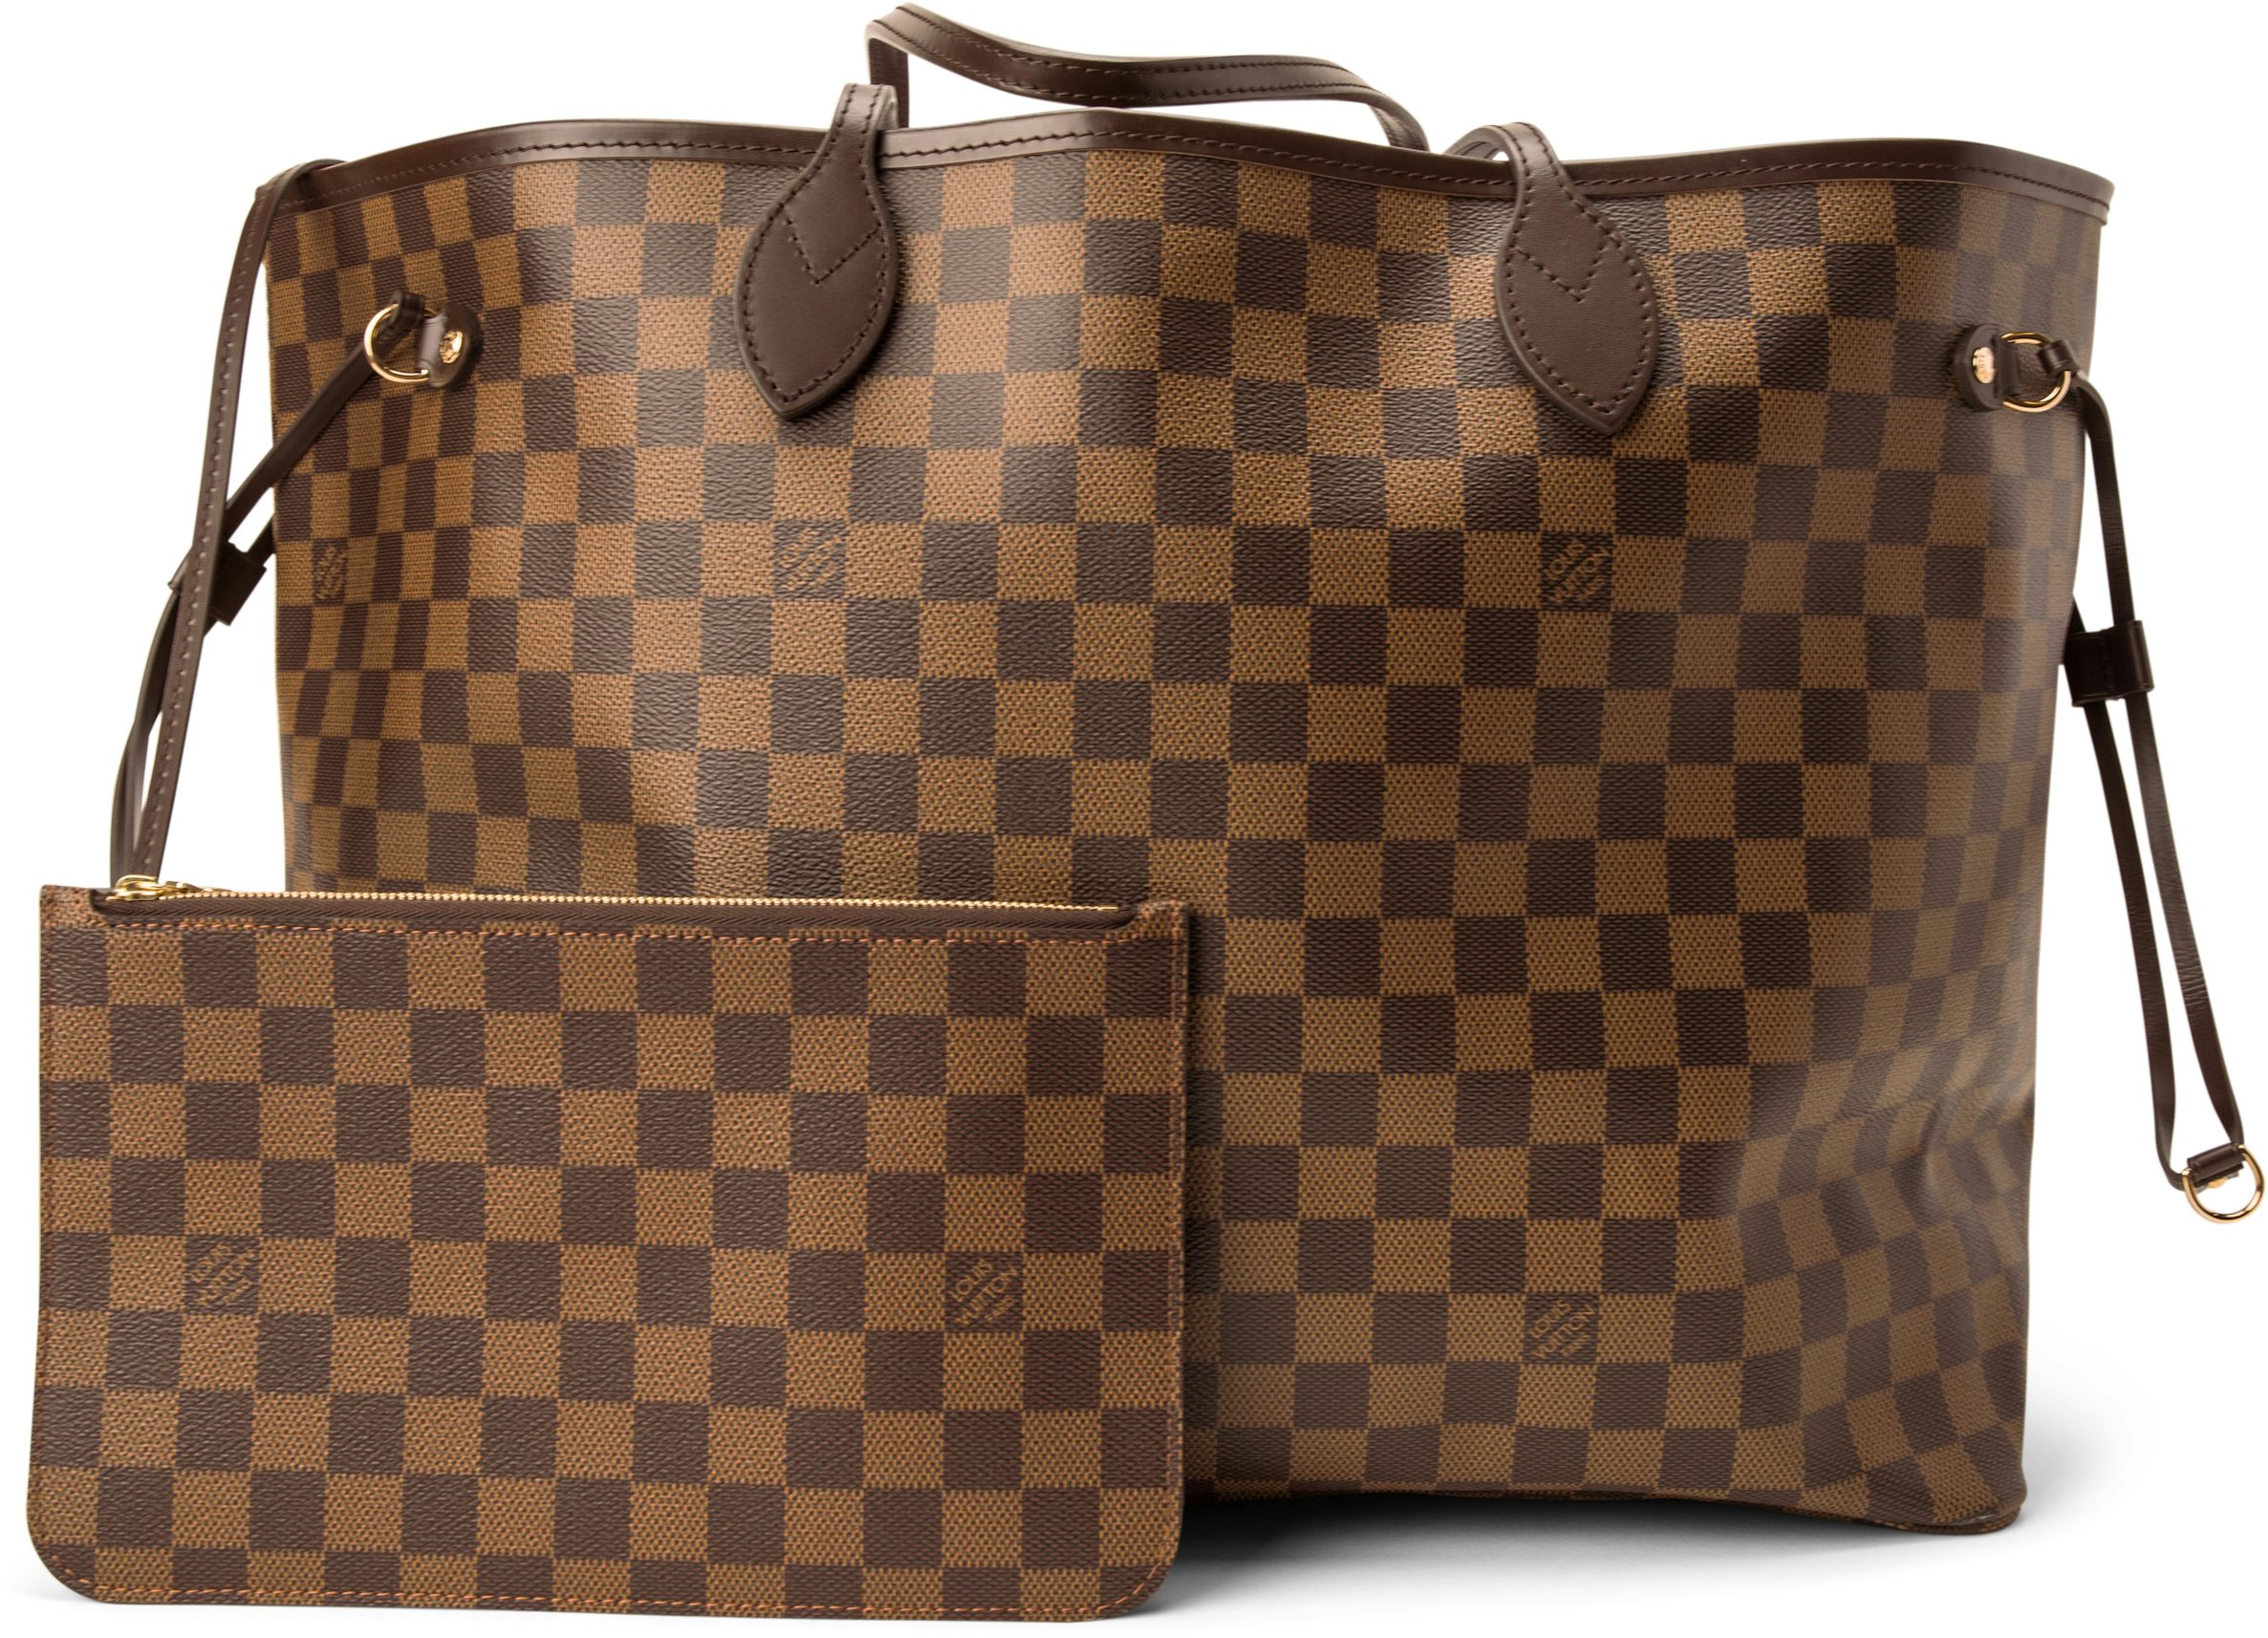 Buy Louis Vuitton Neverfull Bags - StockX